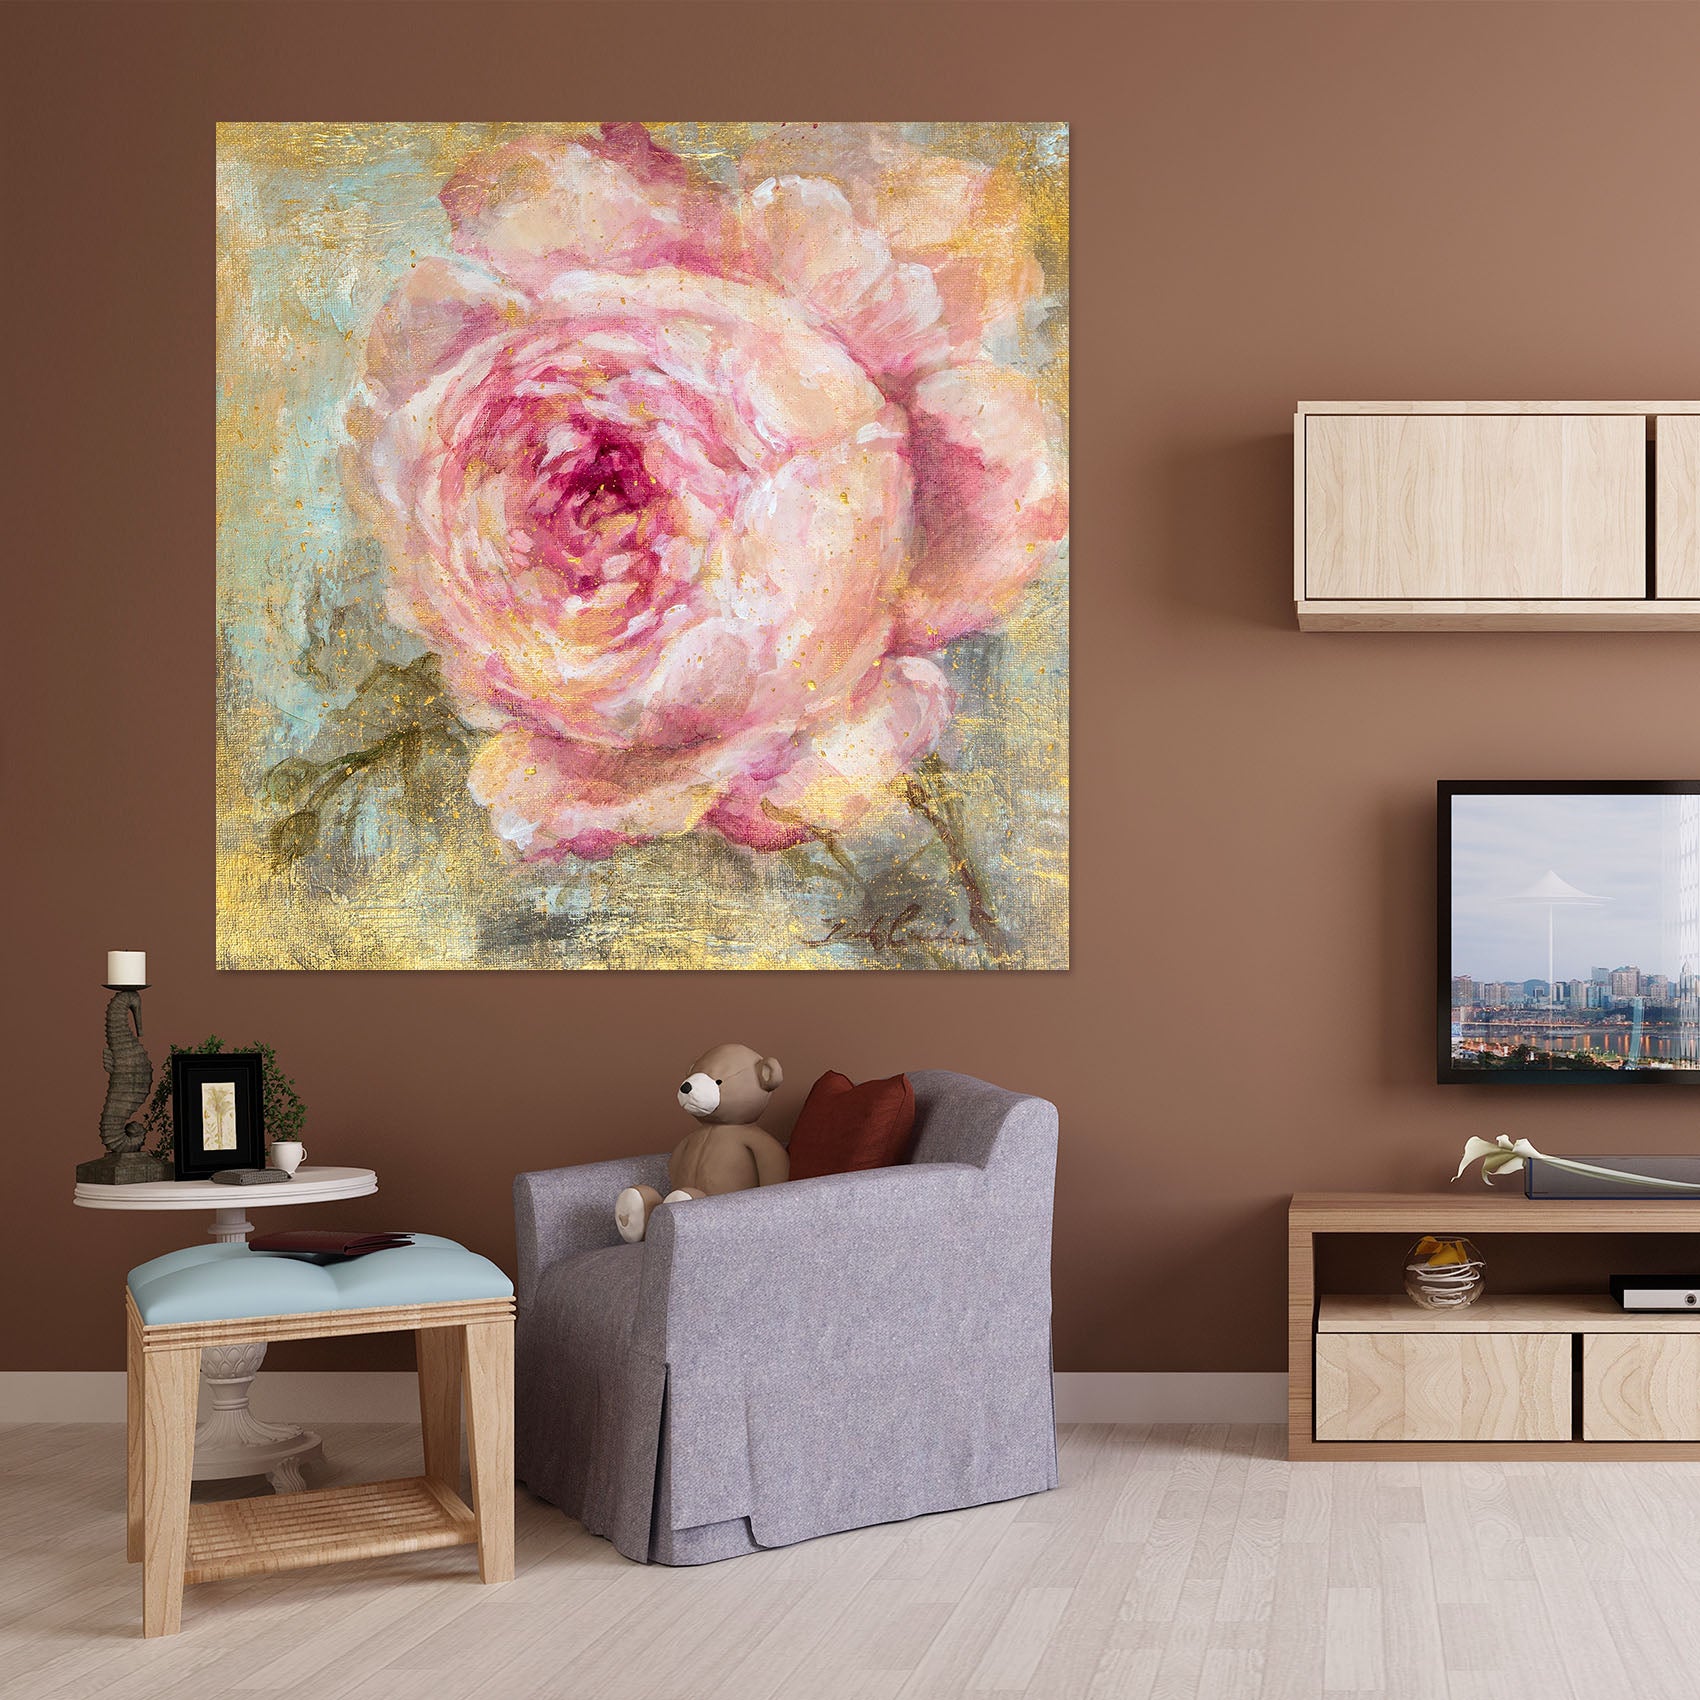 3D Pink Rose 087 Debi Coules Wall Sticker